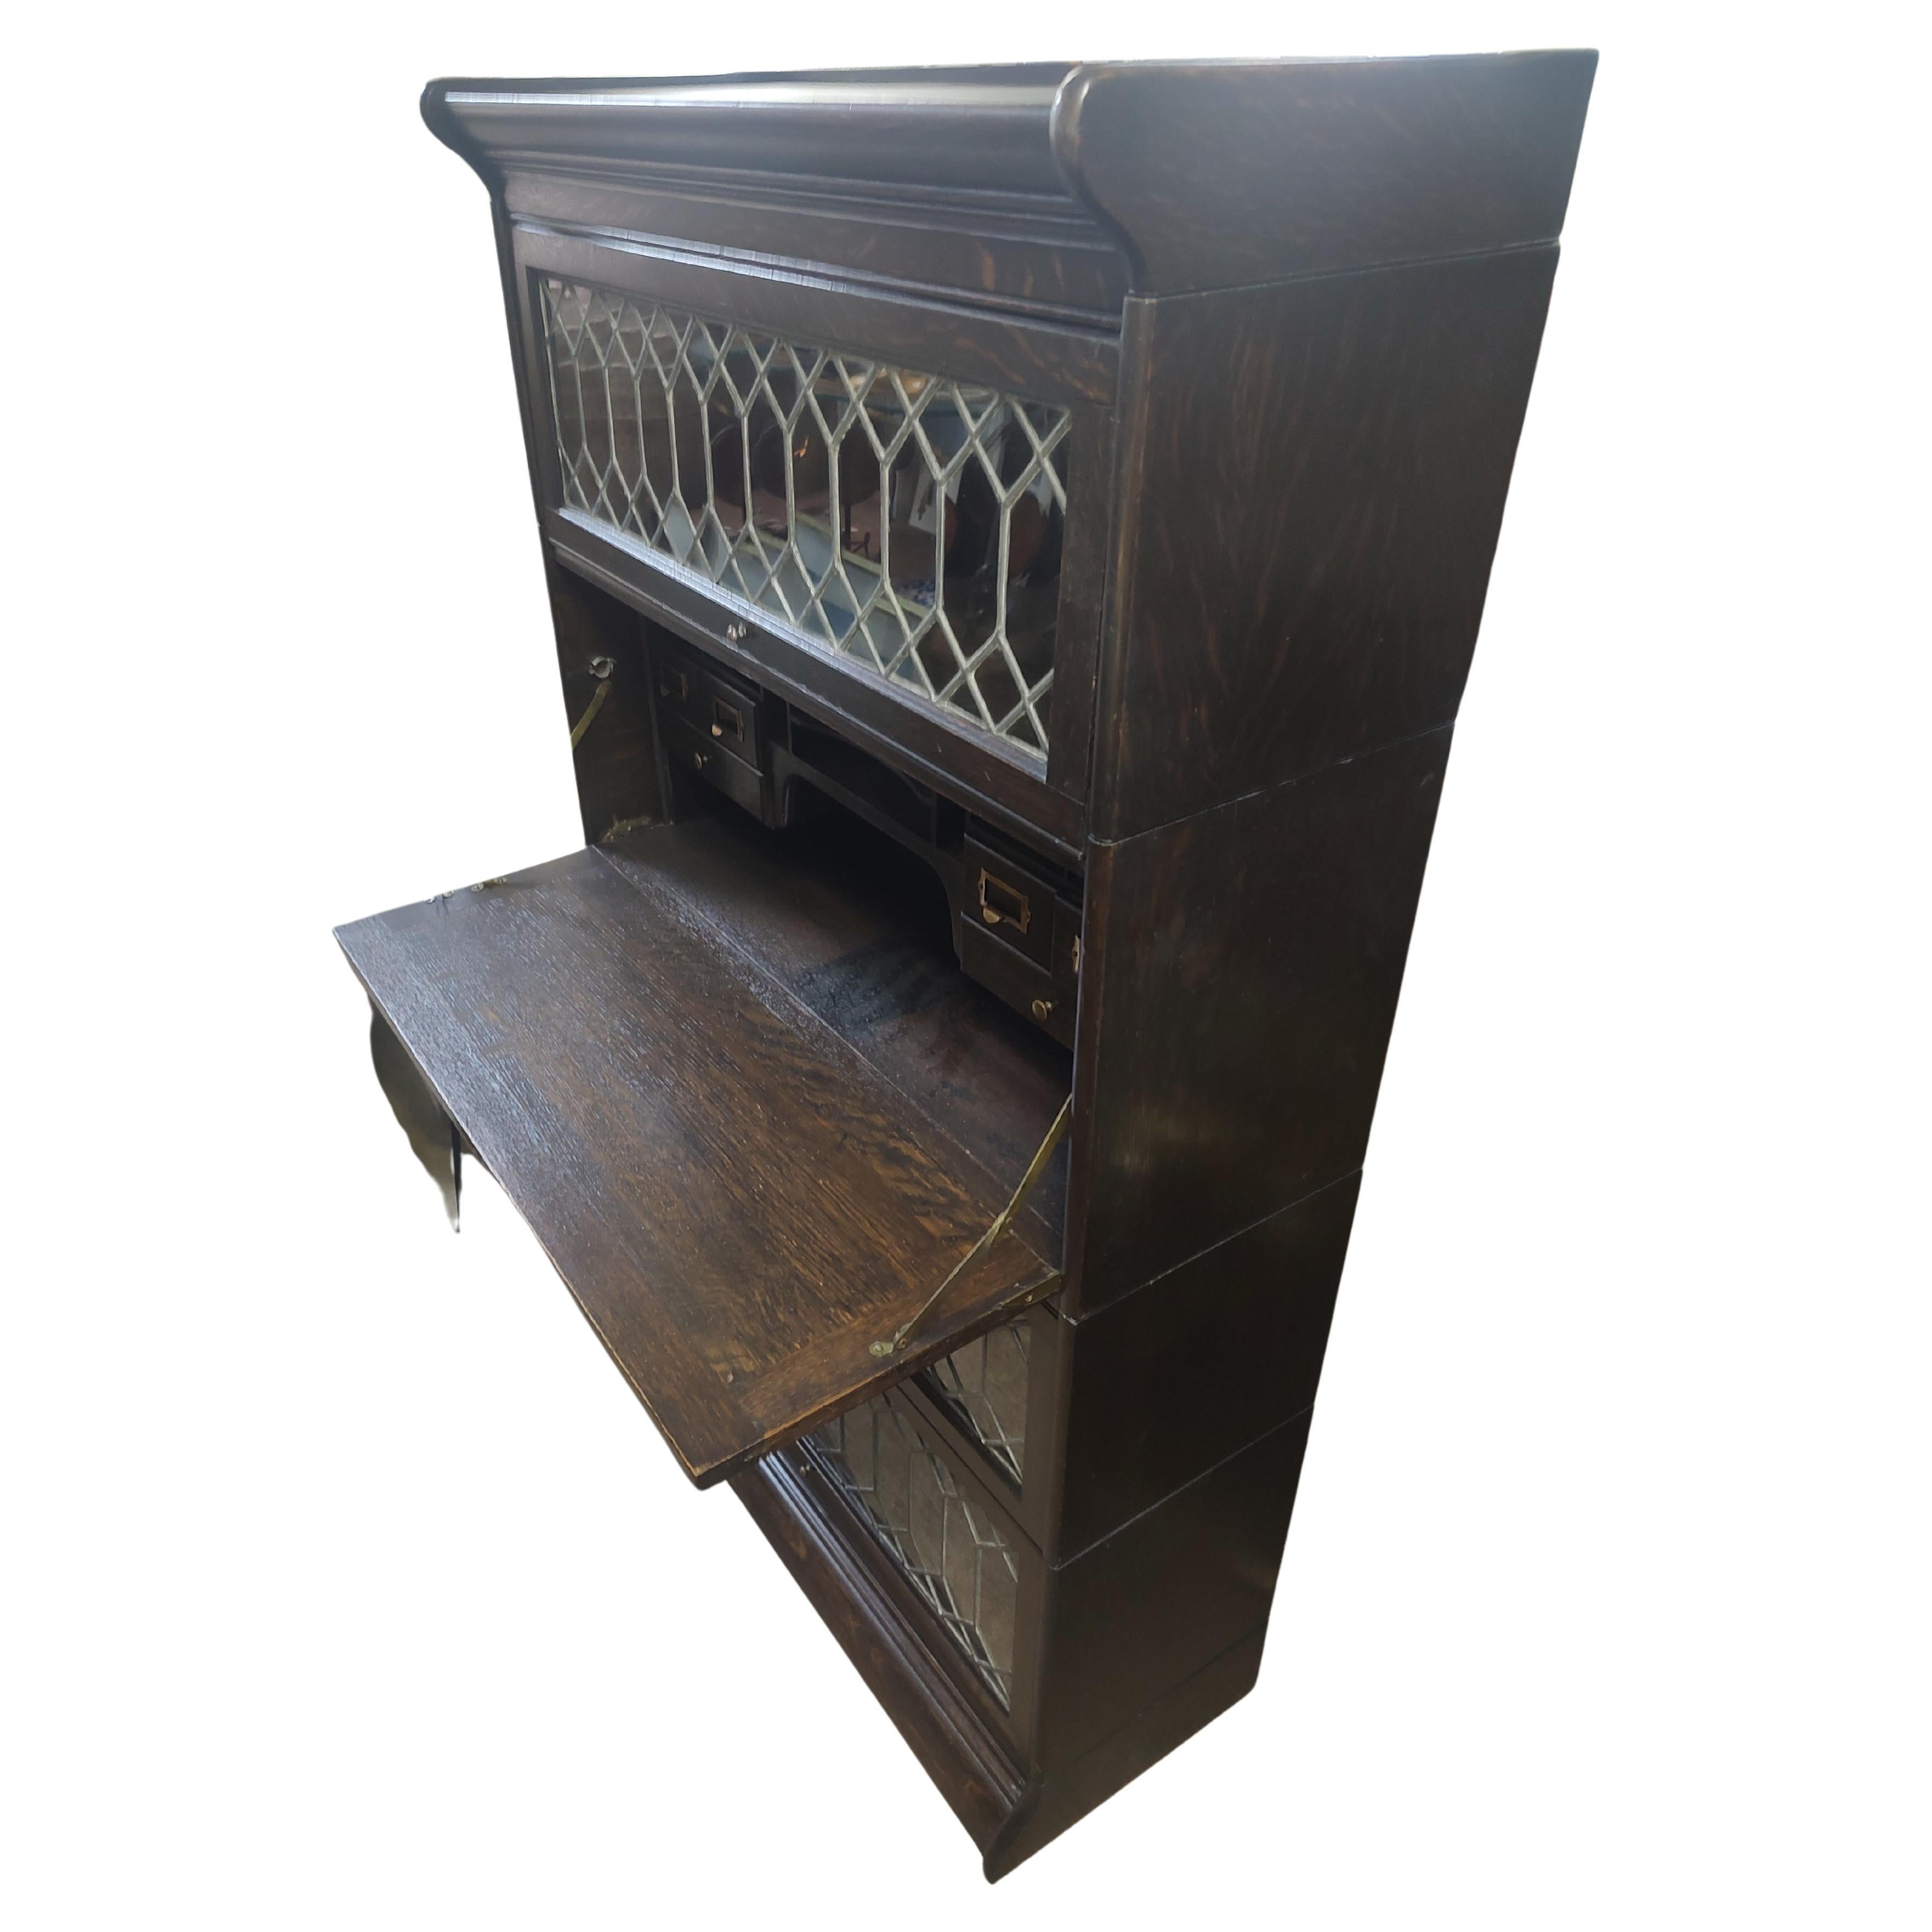 Fabulous simple and elegant 3 section leaded glass bookcase with a drop down desk and compartment drawers. Total of 6 sections all in oak which includes a top & bottom 3 leaded glass sections and the desk. Desk lid, writing surface drops down to a